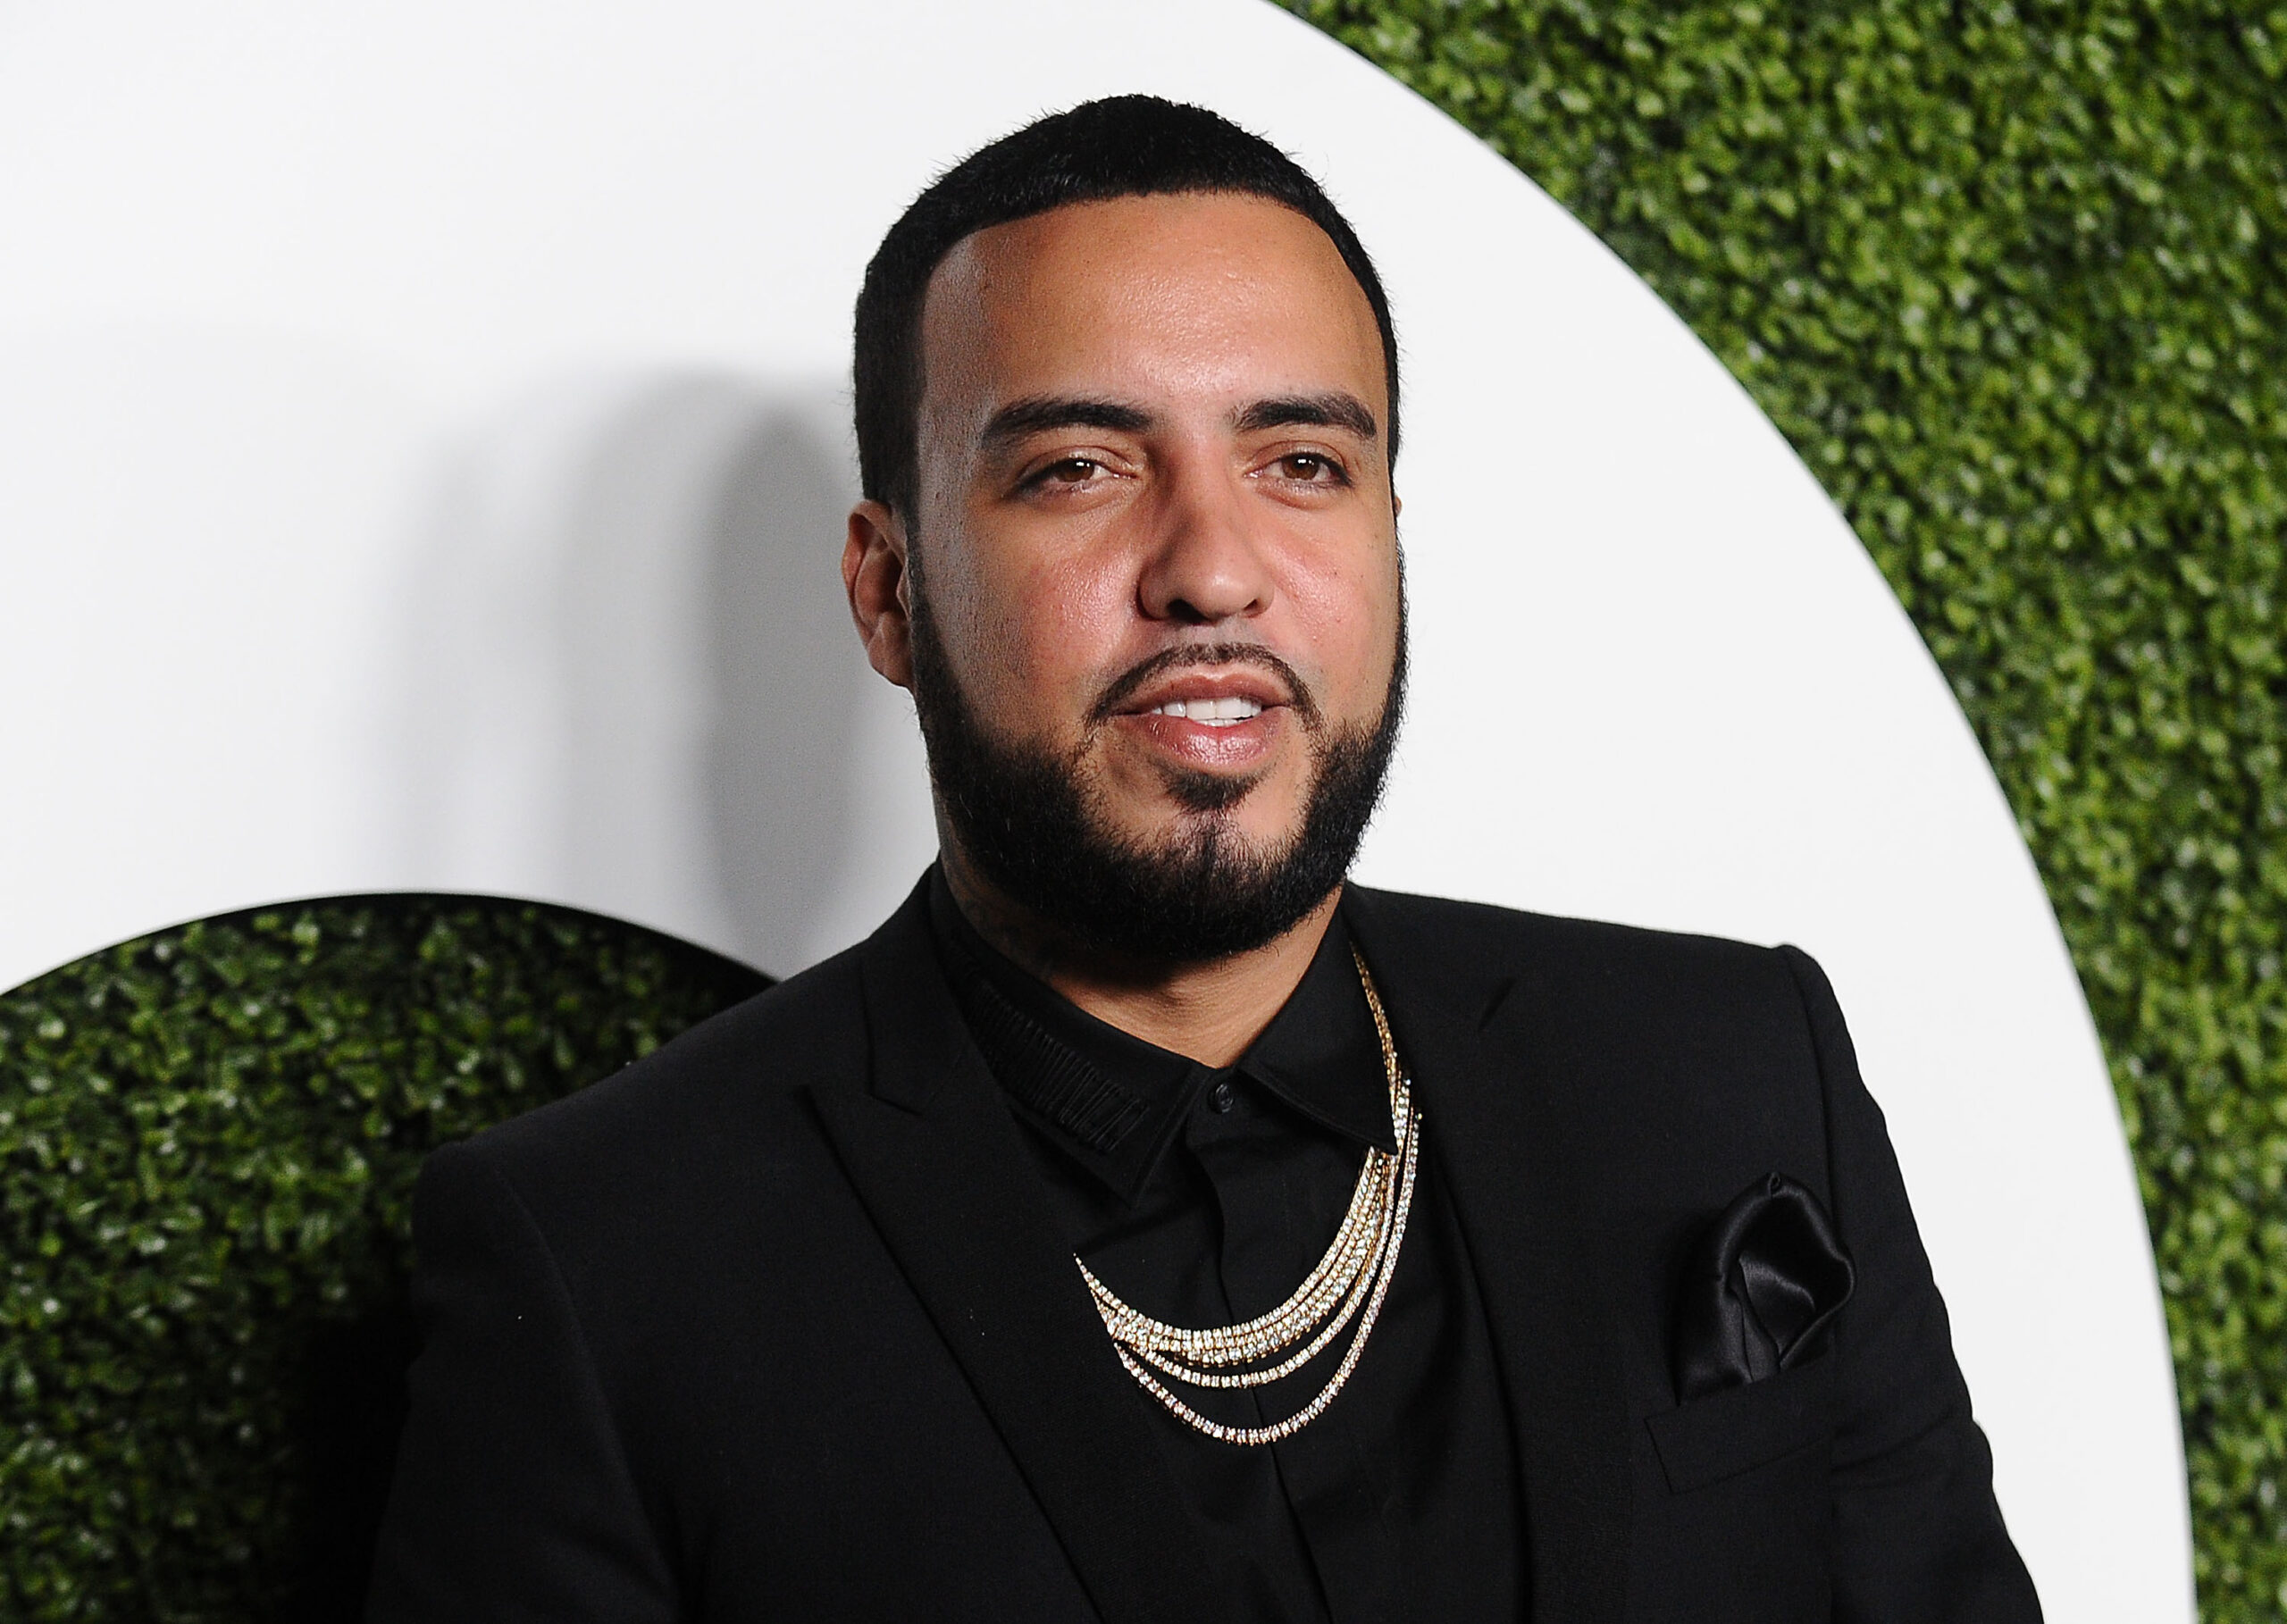 LOS ANGELES, CA - DECEMBER 08:  French Montana attends the GQ Men of the Year party at Chateau Marmont on December 8, 2016 in Los Angeles, California.  (Photo by Jason LaVeris/FilmMagic)